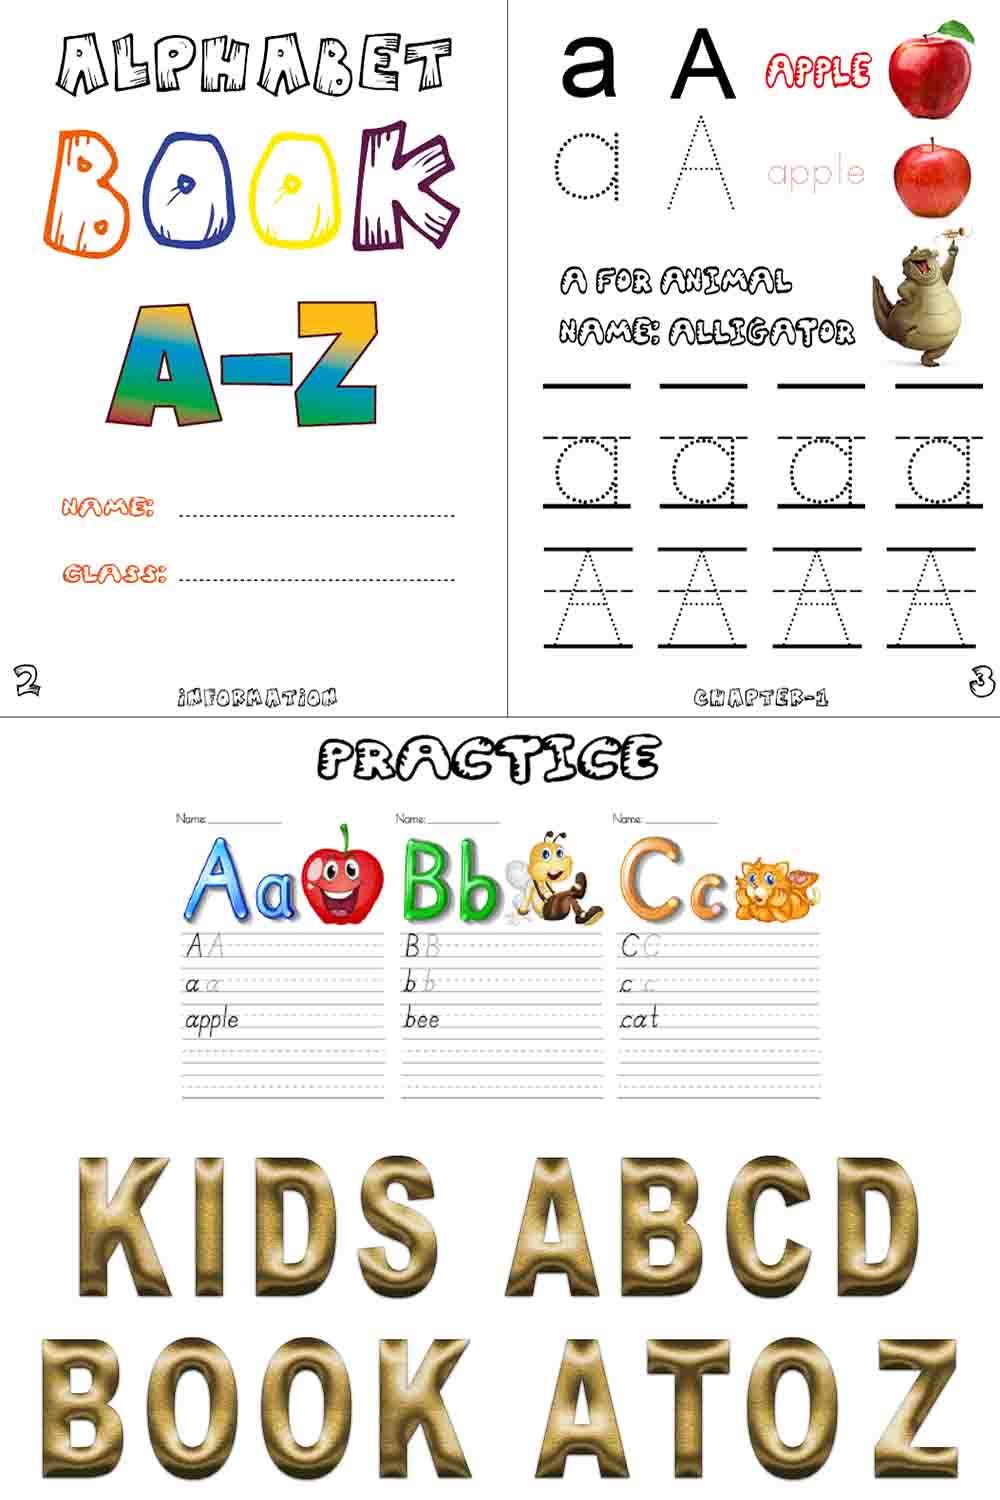 kids book abcd adobe indesign 30 pages includes cover pages pinterest preview image.